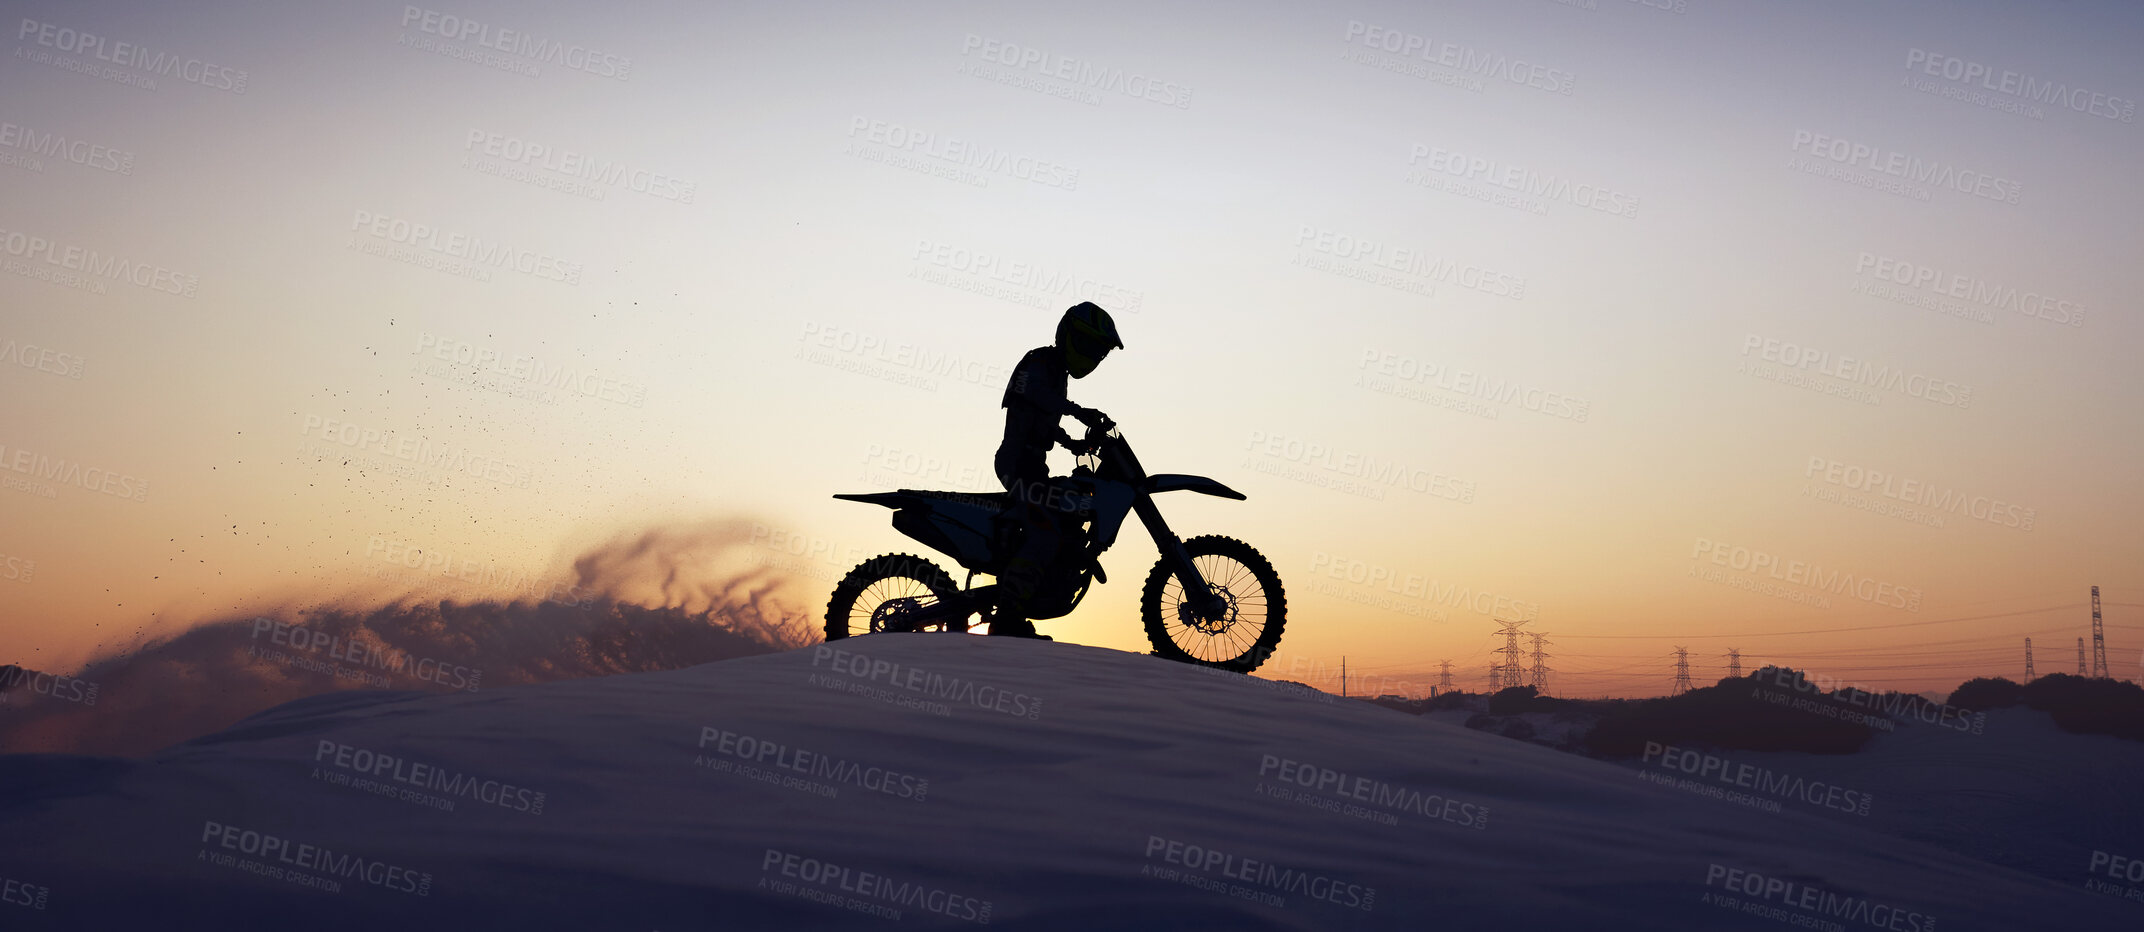 Buy stock photo Motorcycle, sport and silhouette of man on bike at night, sky and background in nature. Fitness sports, exercise biking or motorbike person driving on dirt sand, hill mountain or desert for health